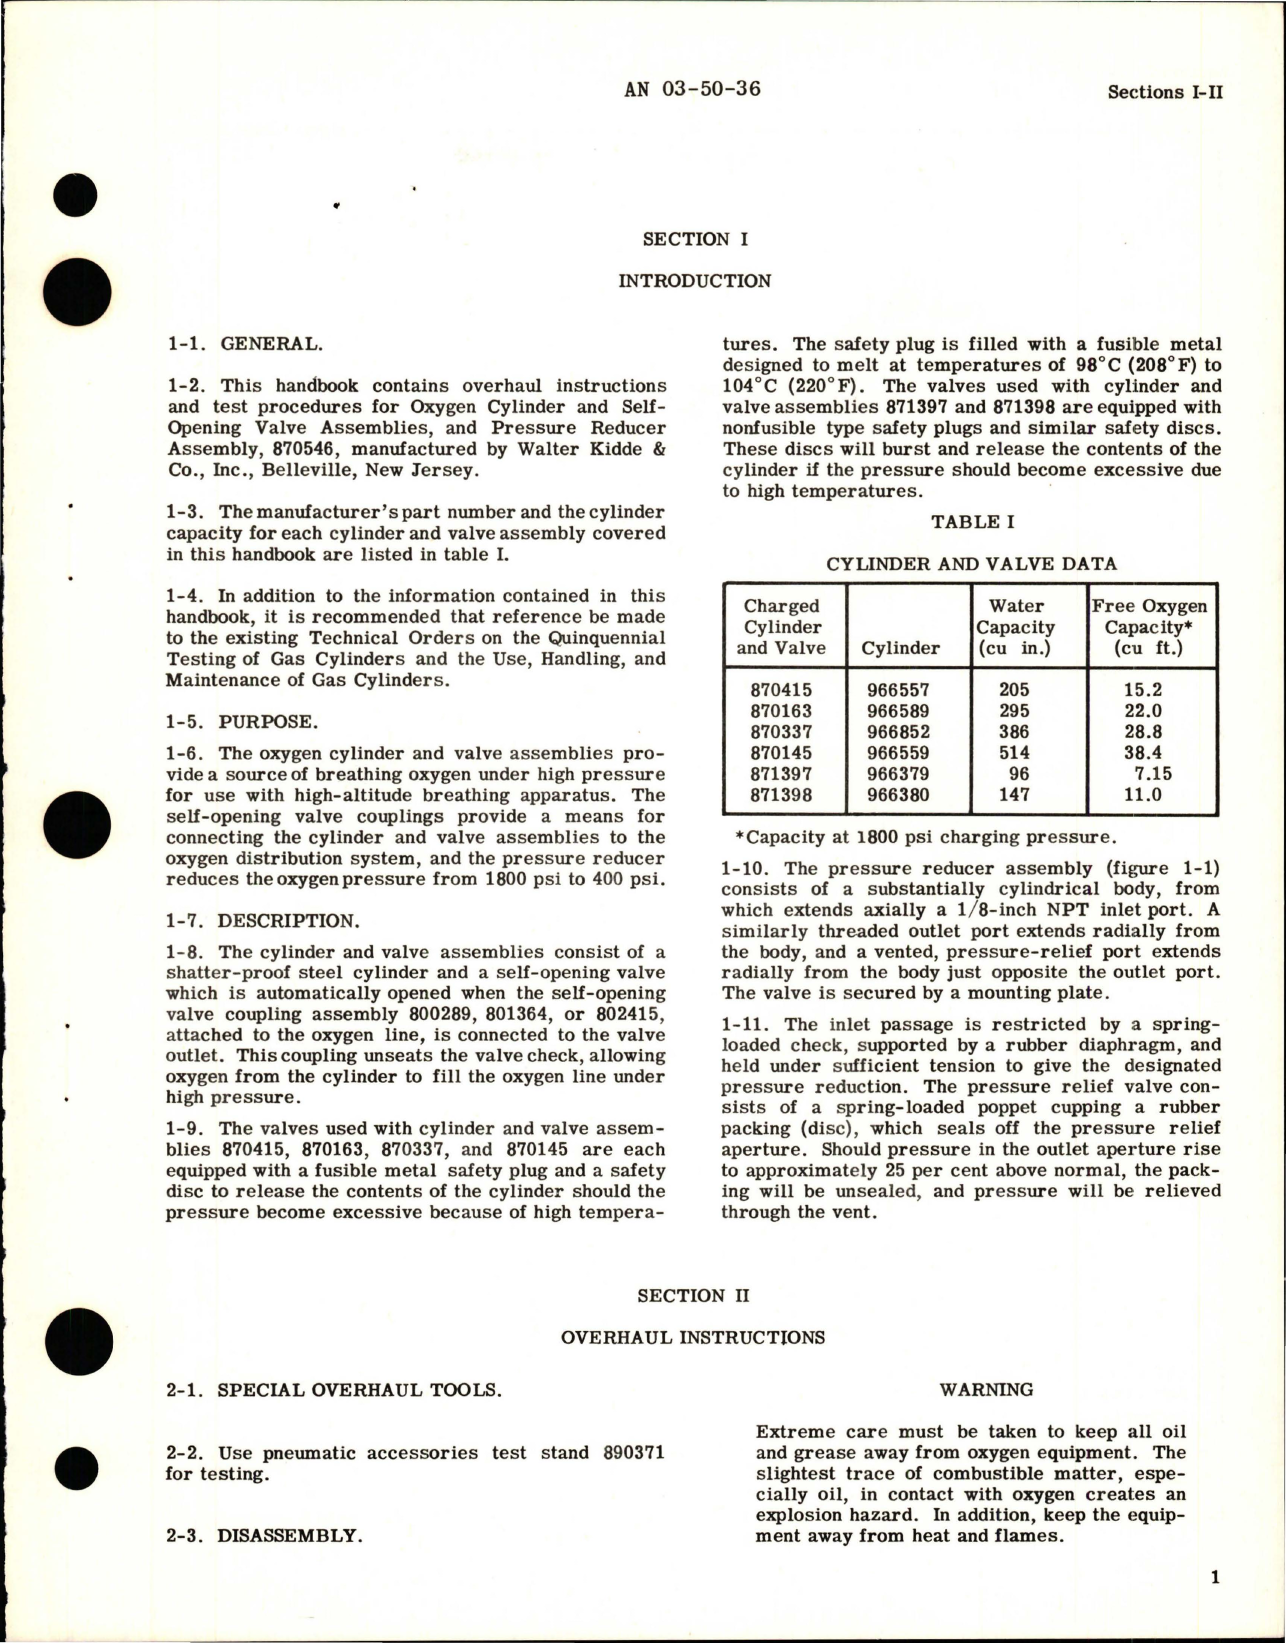 Sample page 5 from AirCorps Library document: Overhaul Instructions for Oxygen Cylinder and Self-Opening Valve, and Pressure Reducer Assembly 